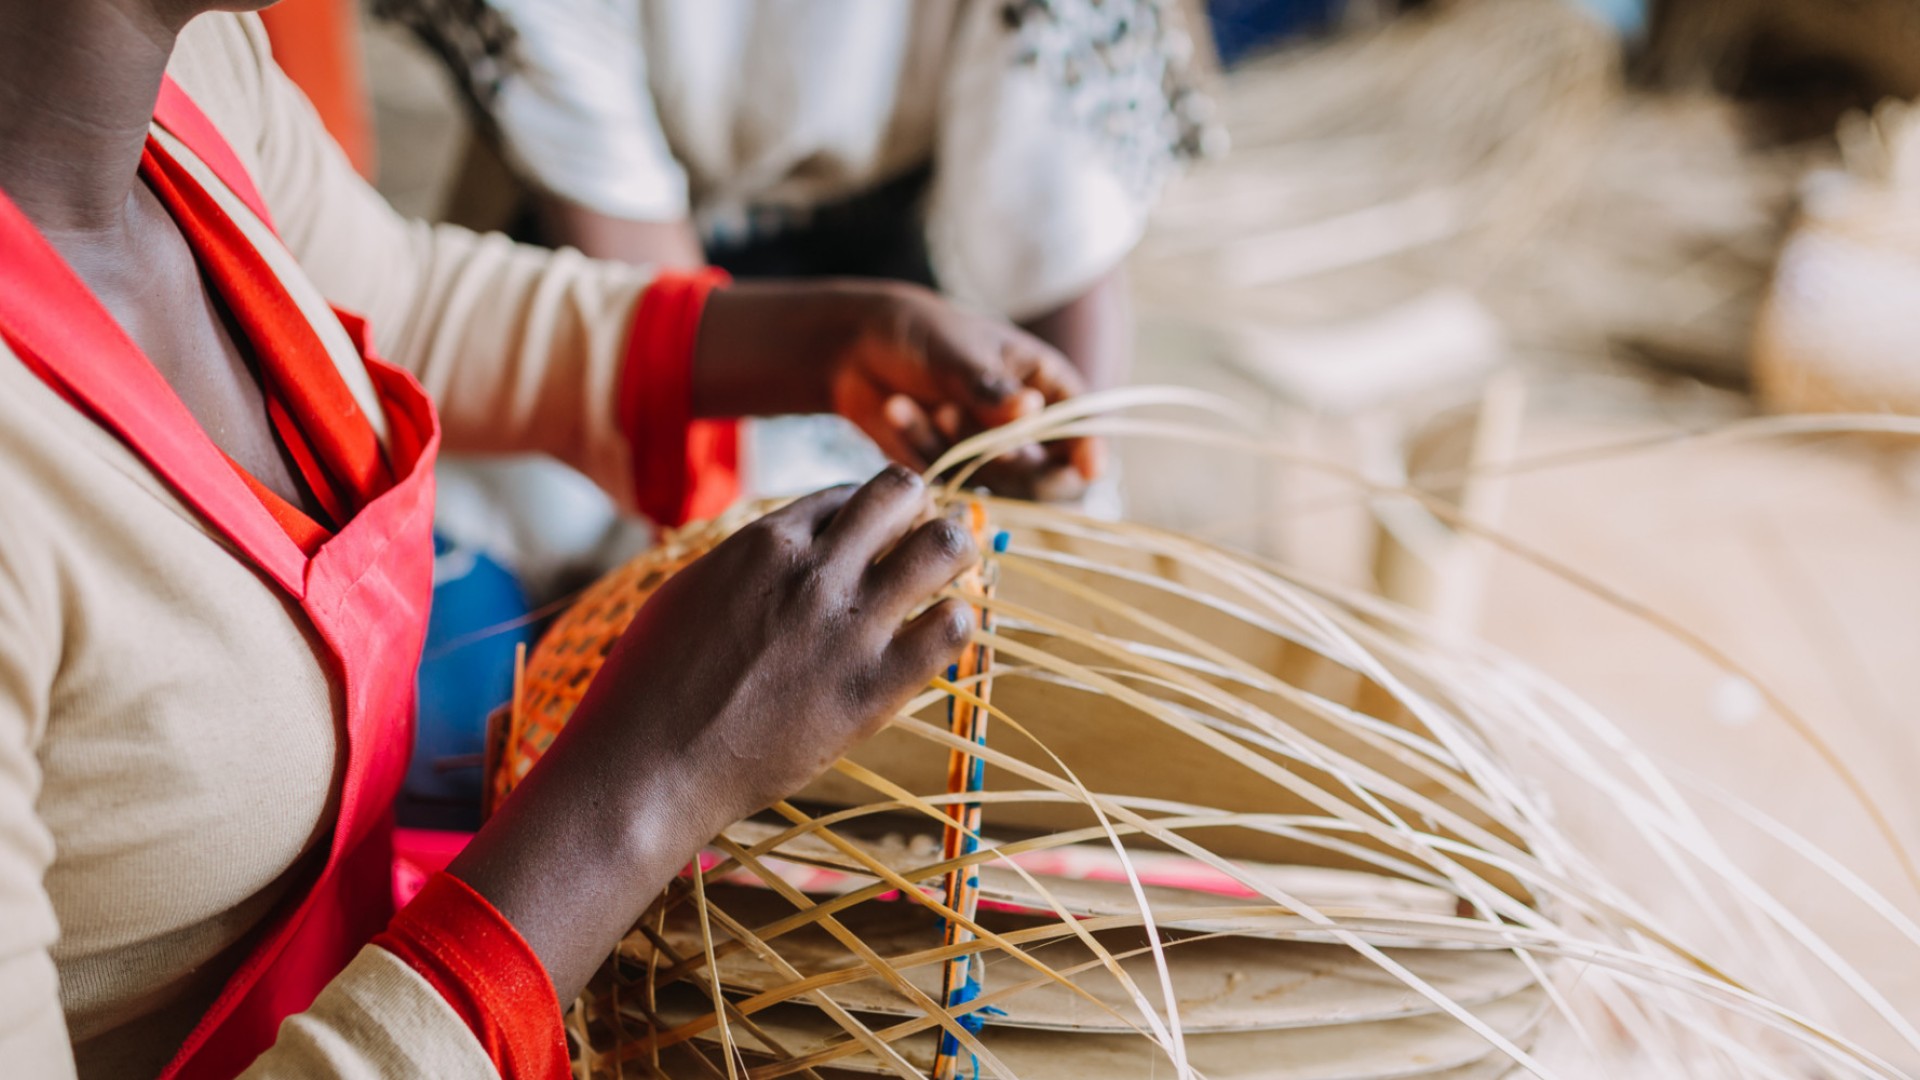 Woman practicing traditional basket weaving in a small town in Rwanda